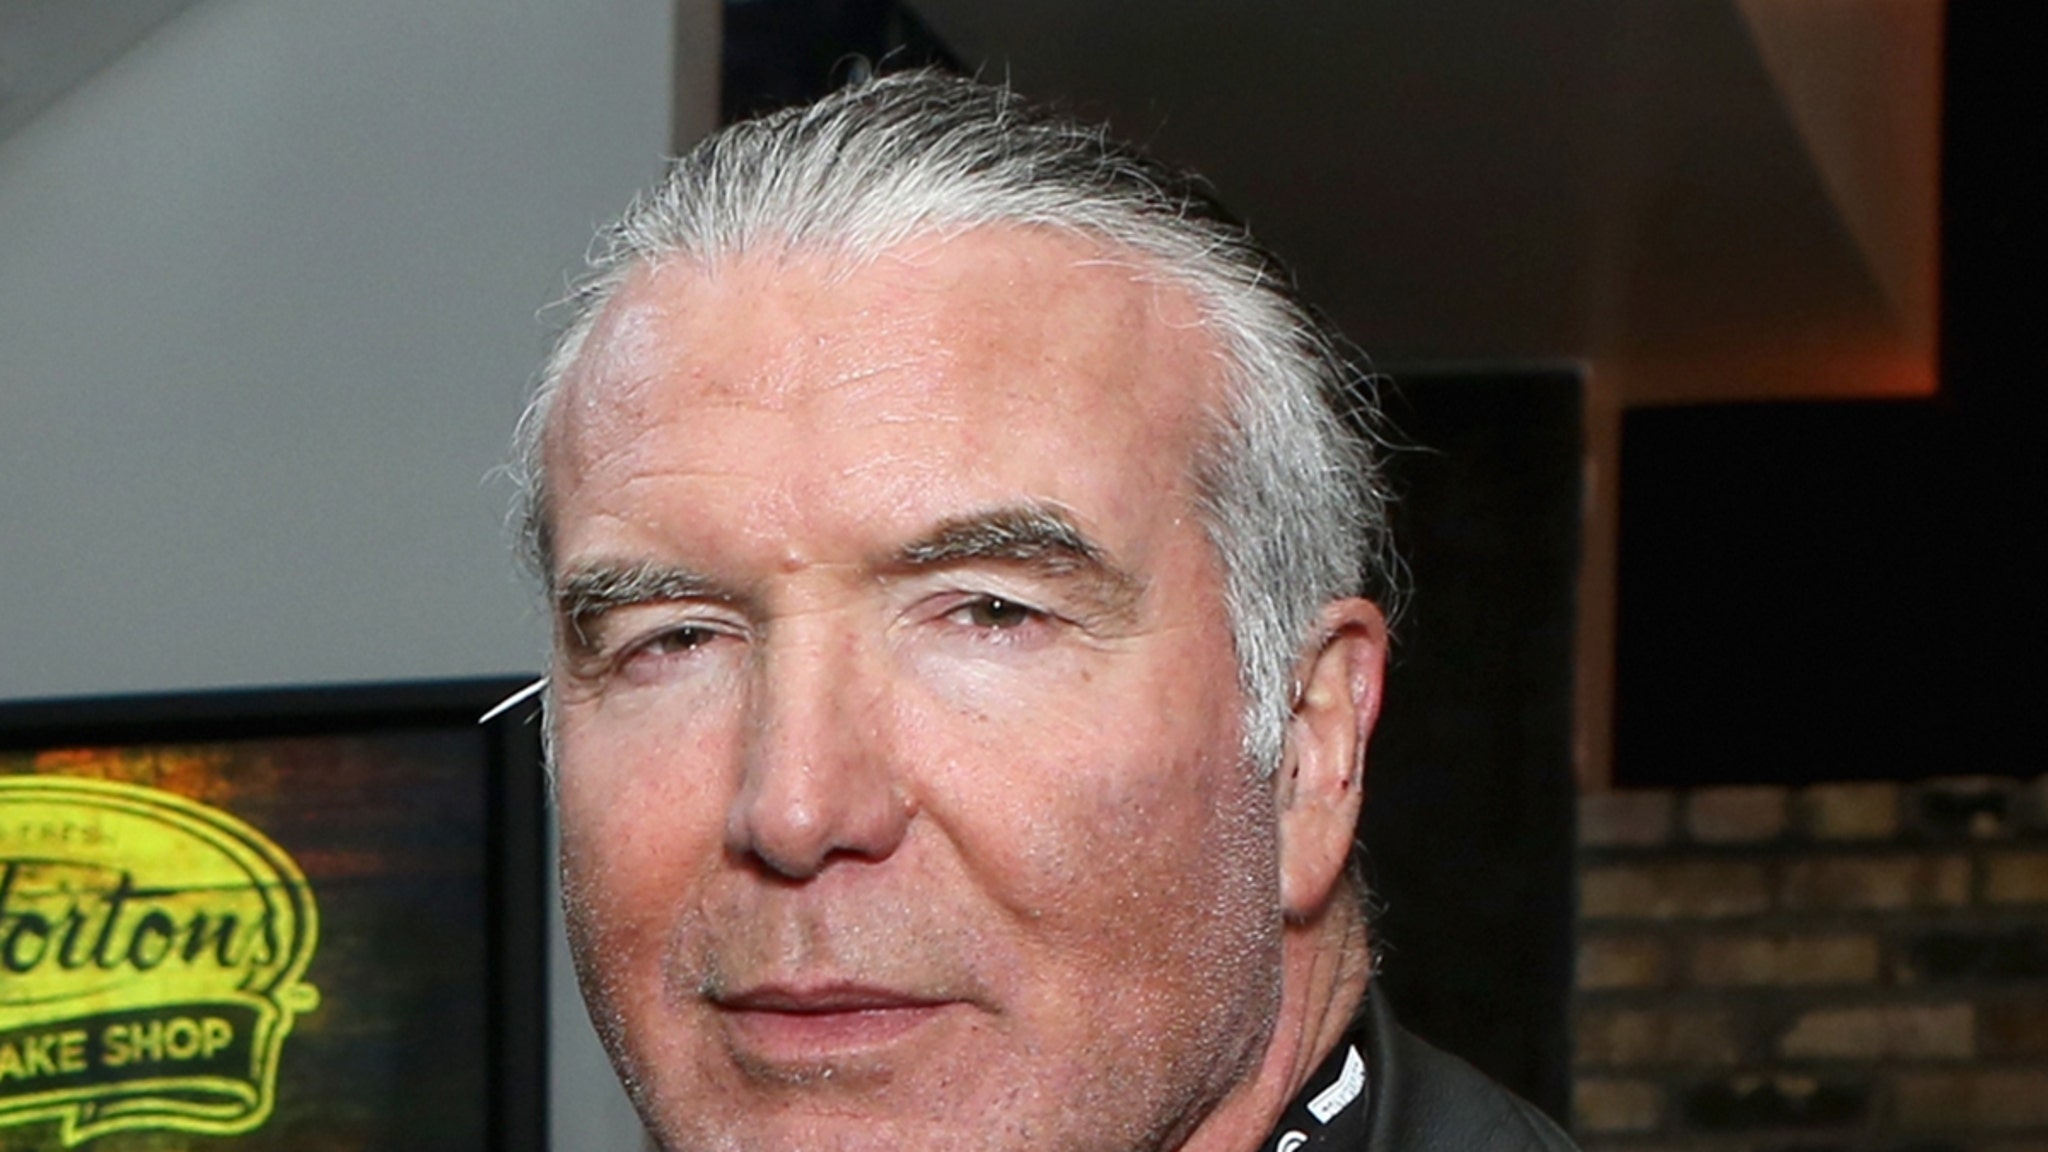 WWE Legend Scott Hall Hospitalized After Suffering Injuries In Scary Fall